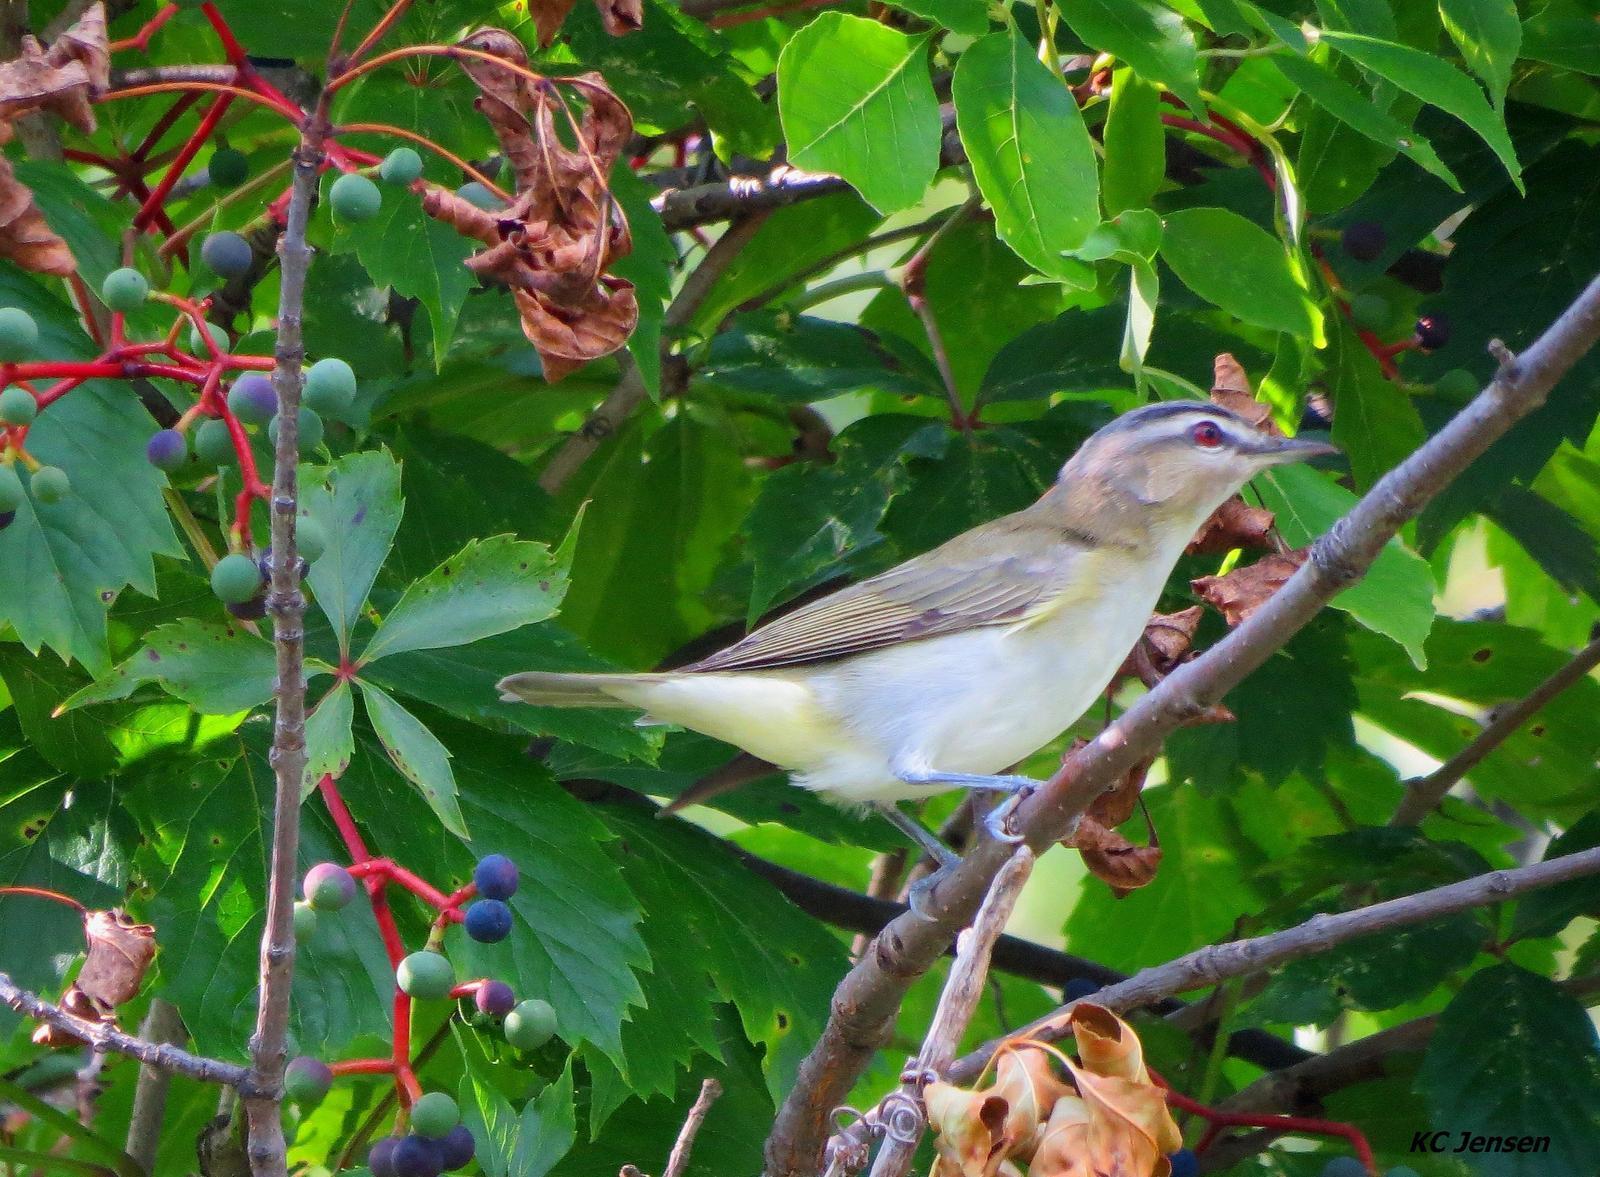 Red-eyed Vireo Photo by Kent Jensen